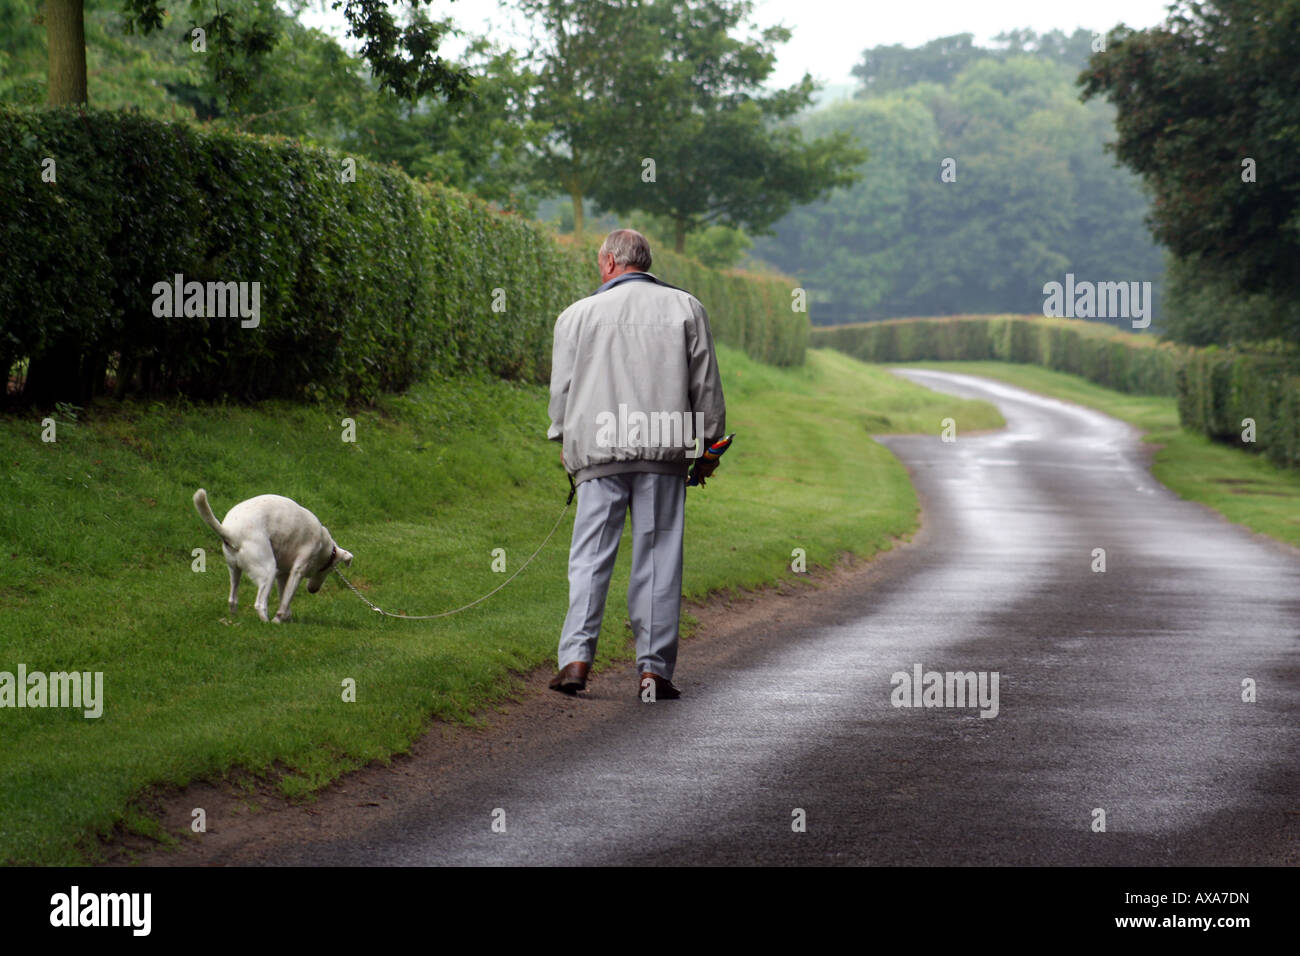 A small white dog relieves itself in a country lane Stock Photo